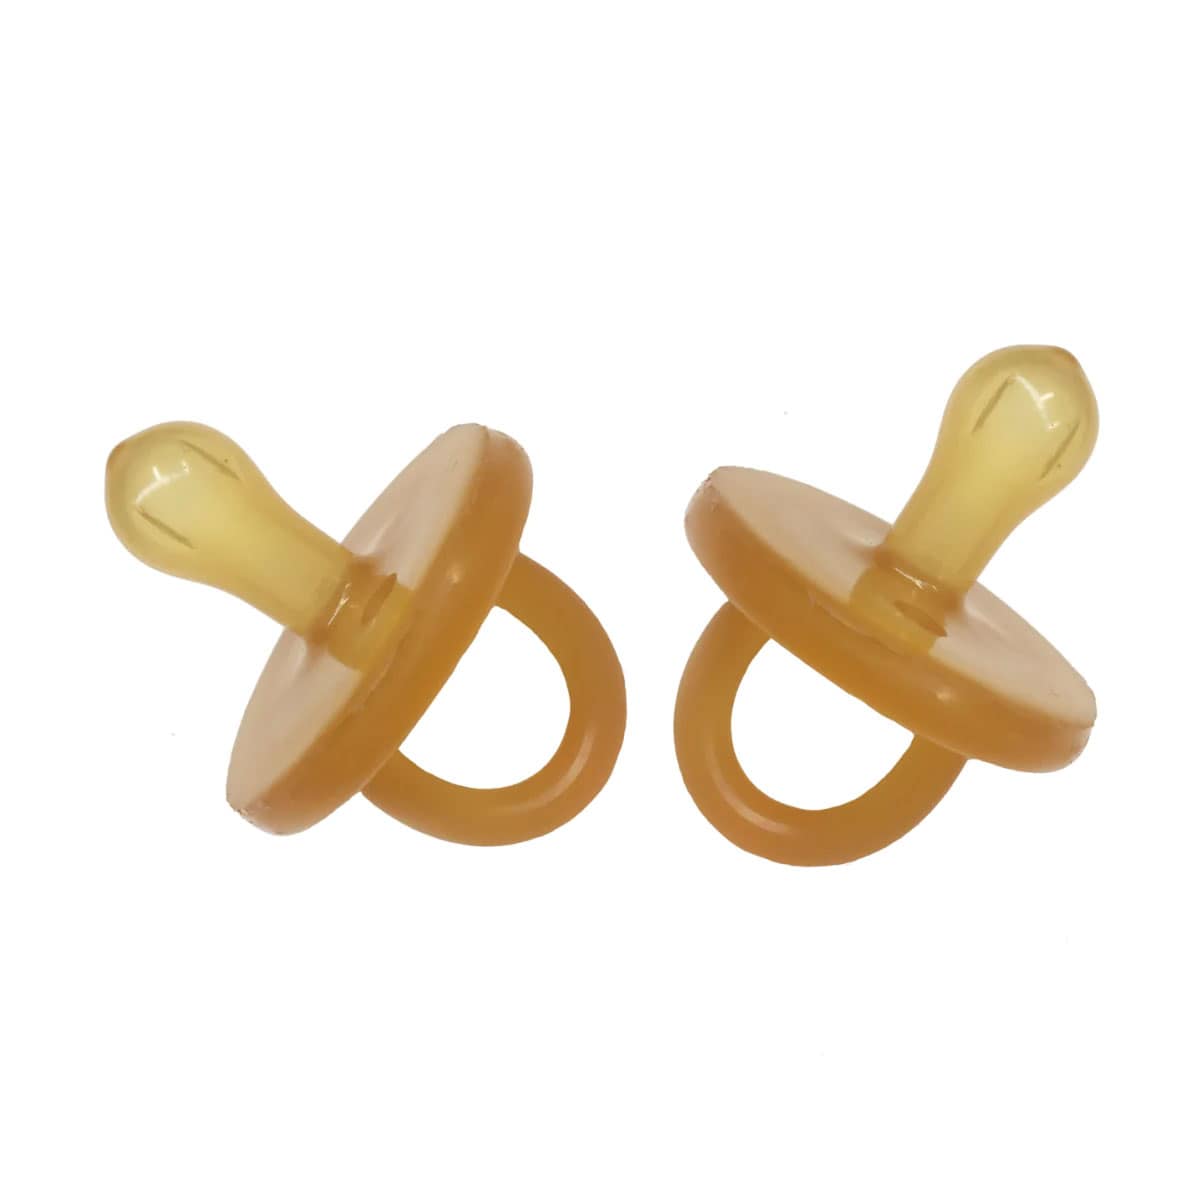 Natural Rubber Soothers Rounded Large 6 Months+ 2 Pack